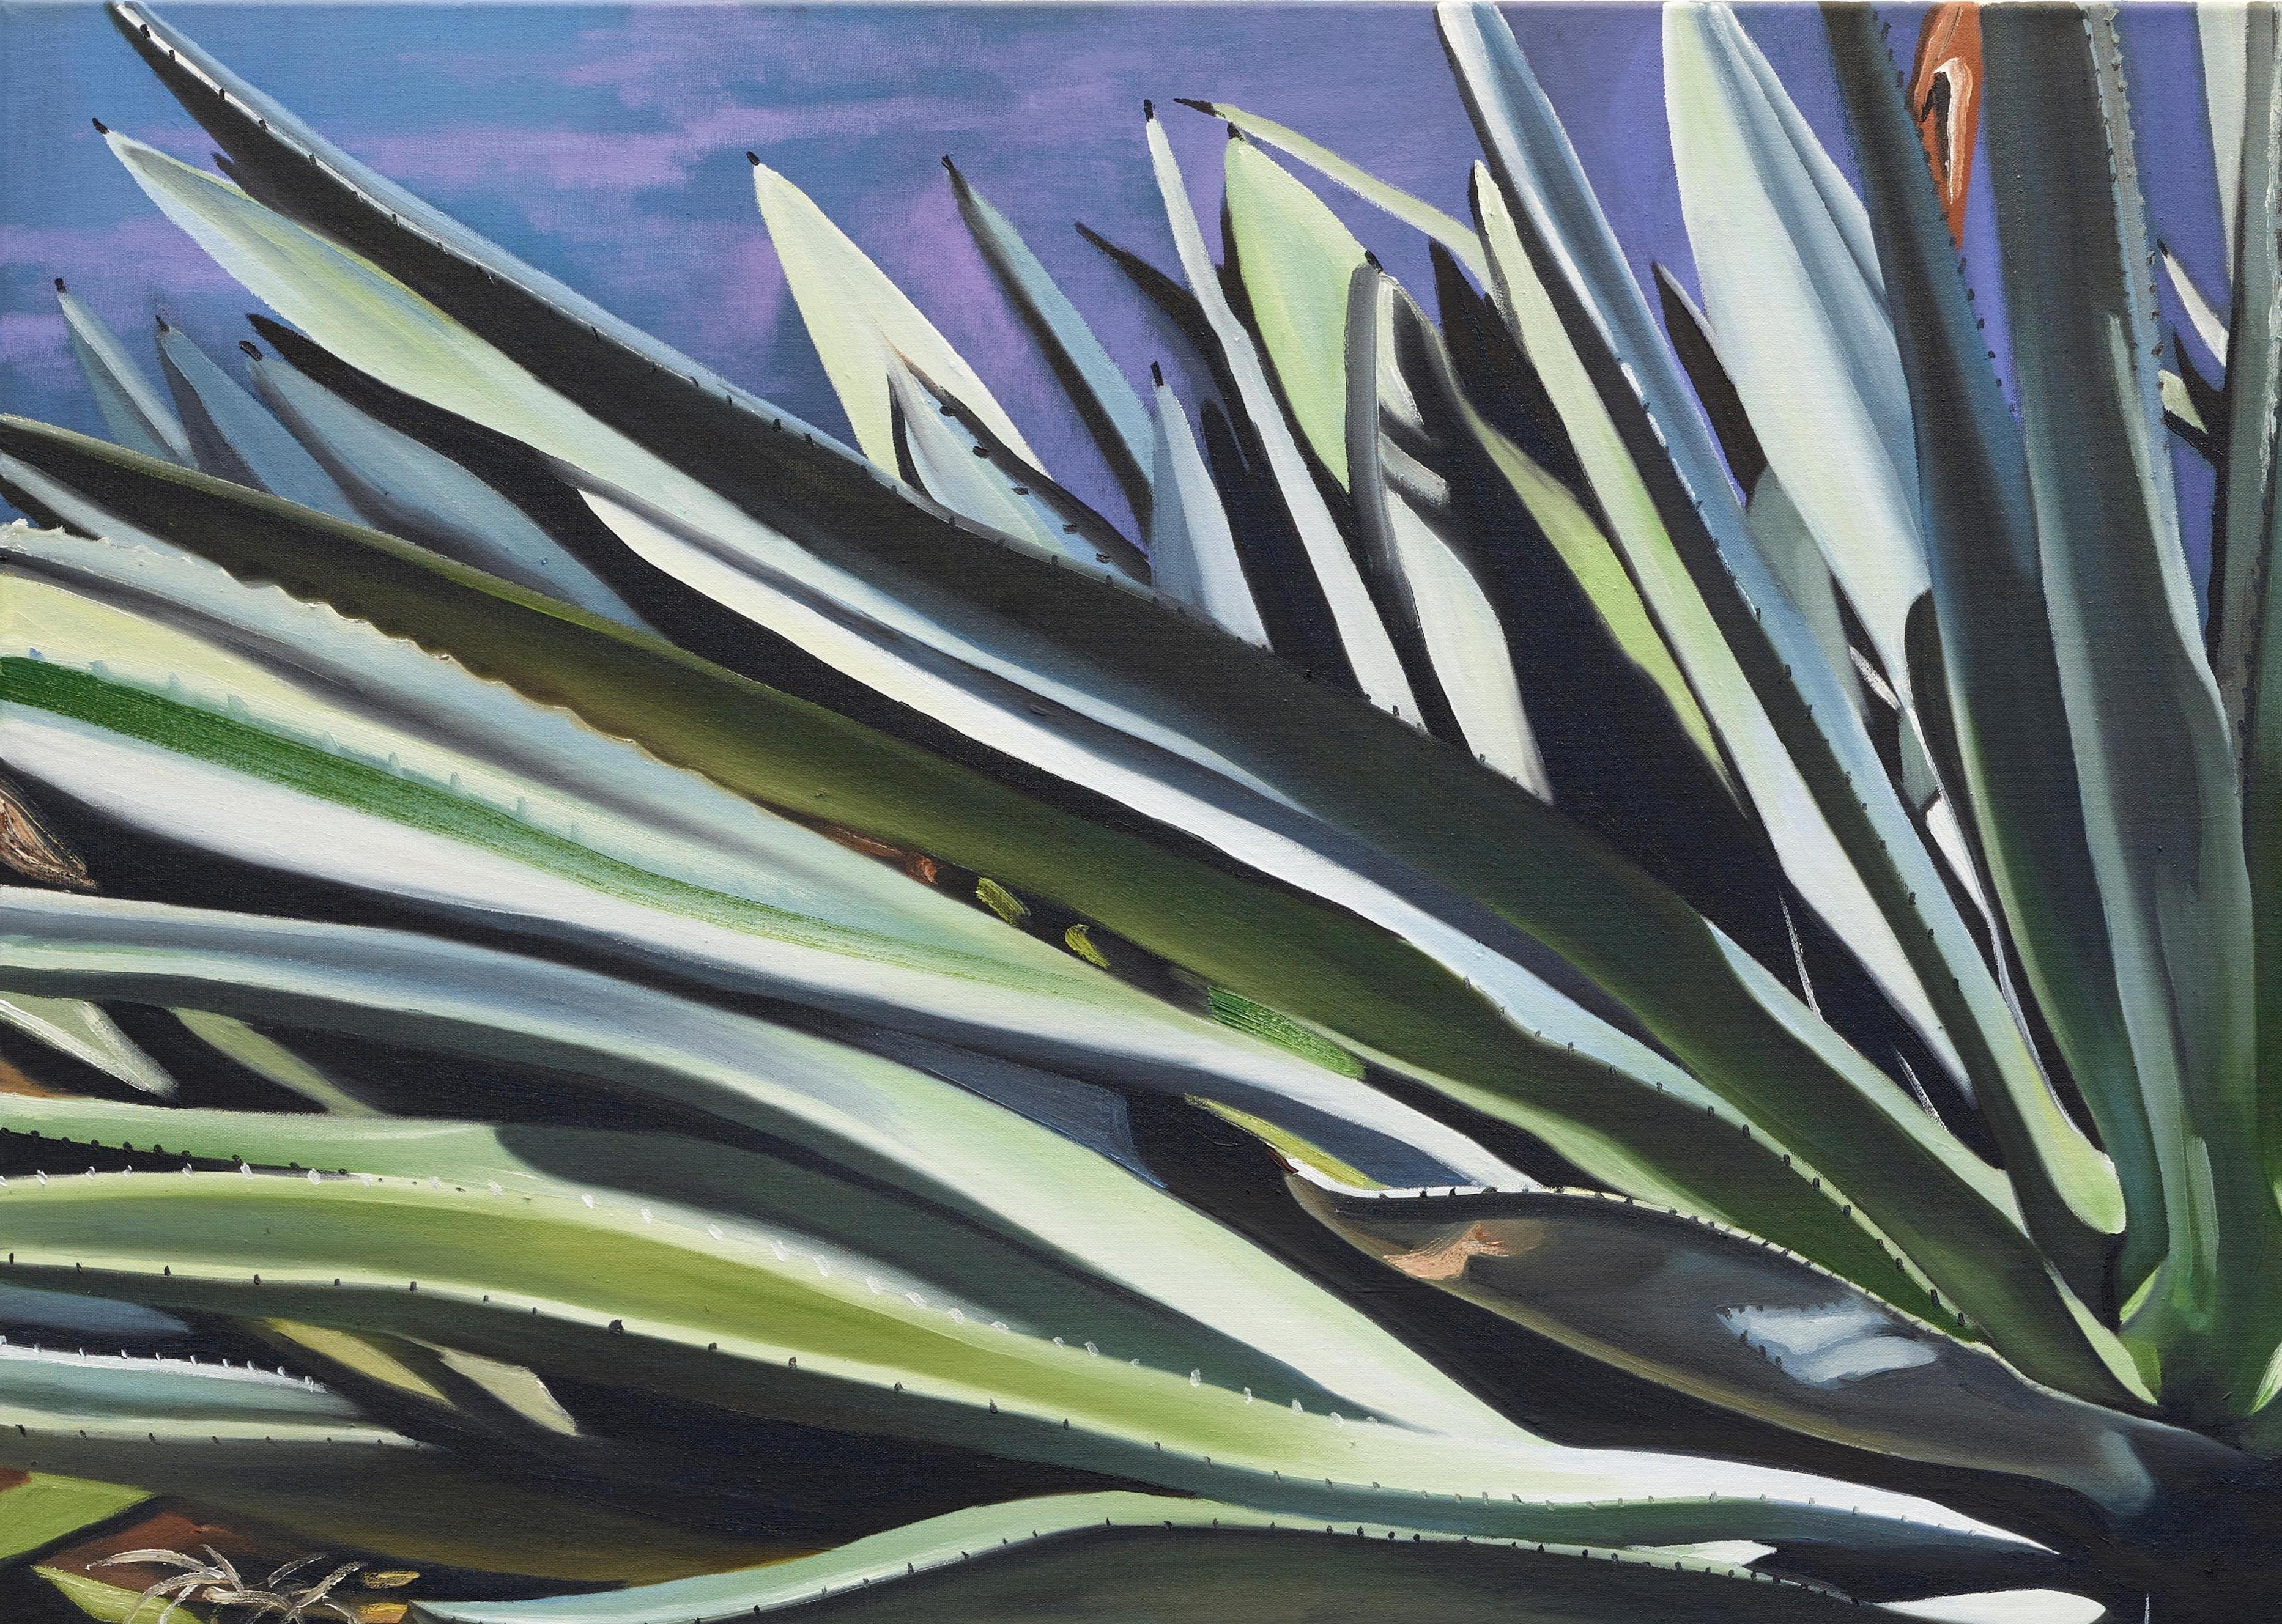 orom id atset (2) / figuration, agave, green, blue, photorealism, landscape - Painting by Silke Albrecht